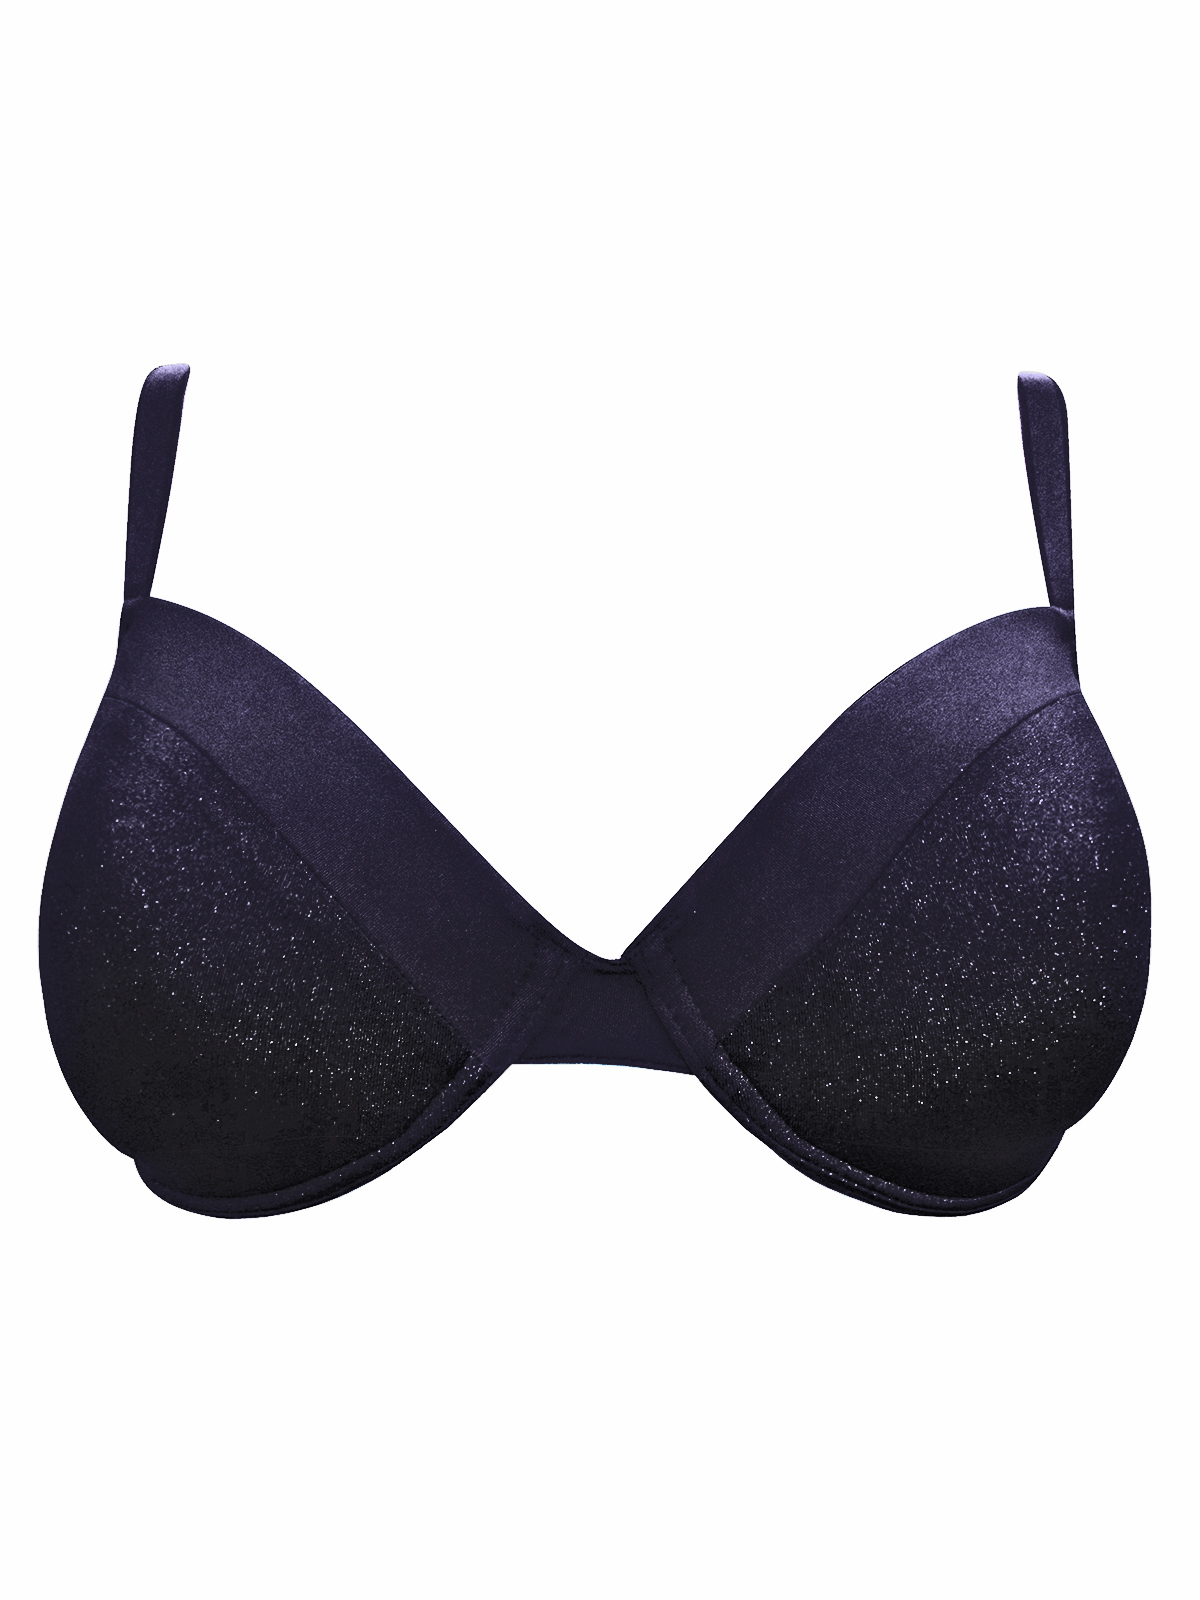 Ellos - - Ellos BLACK Padded & Wired Full Cup Bra - Size 32 (DD cup)